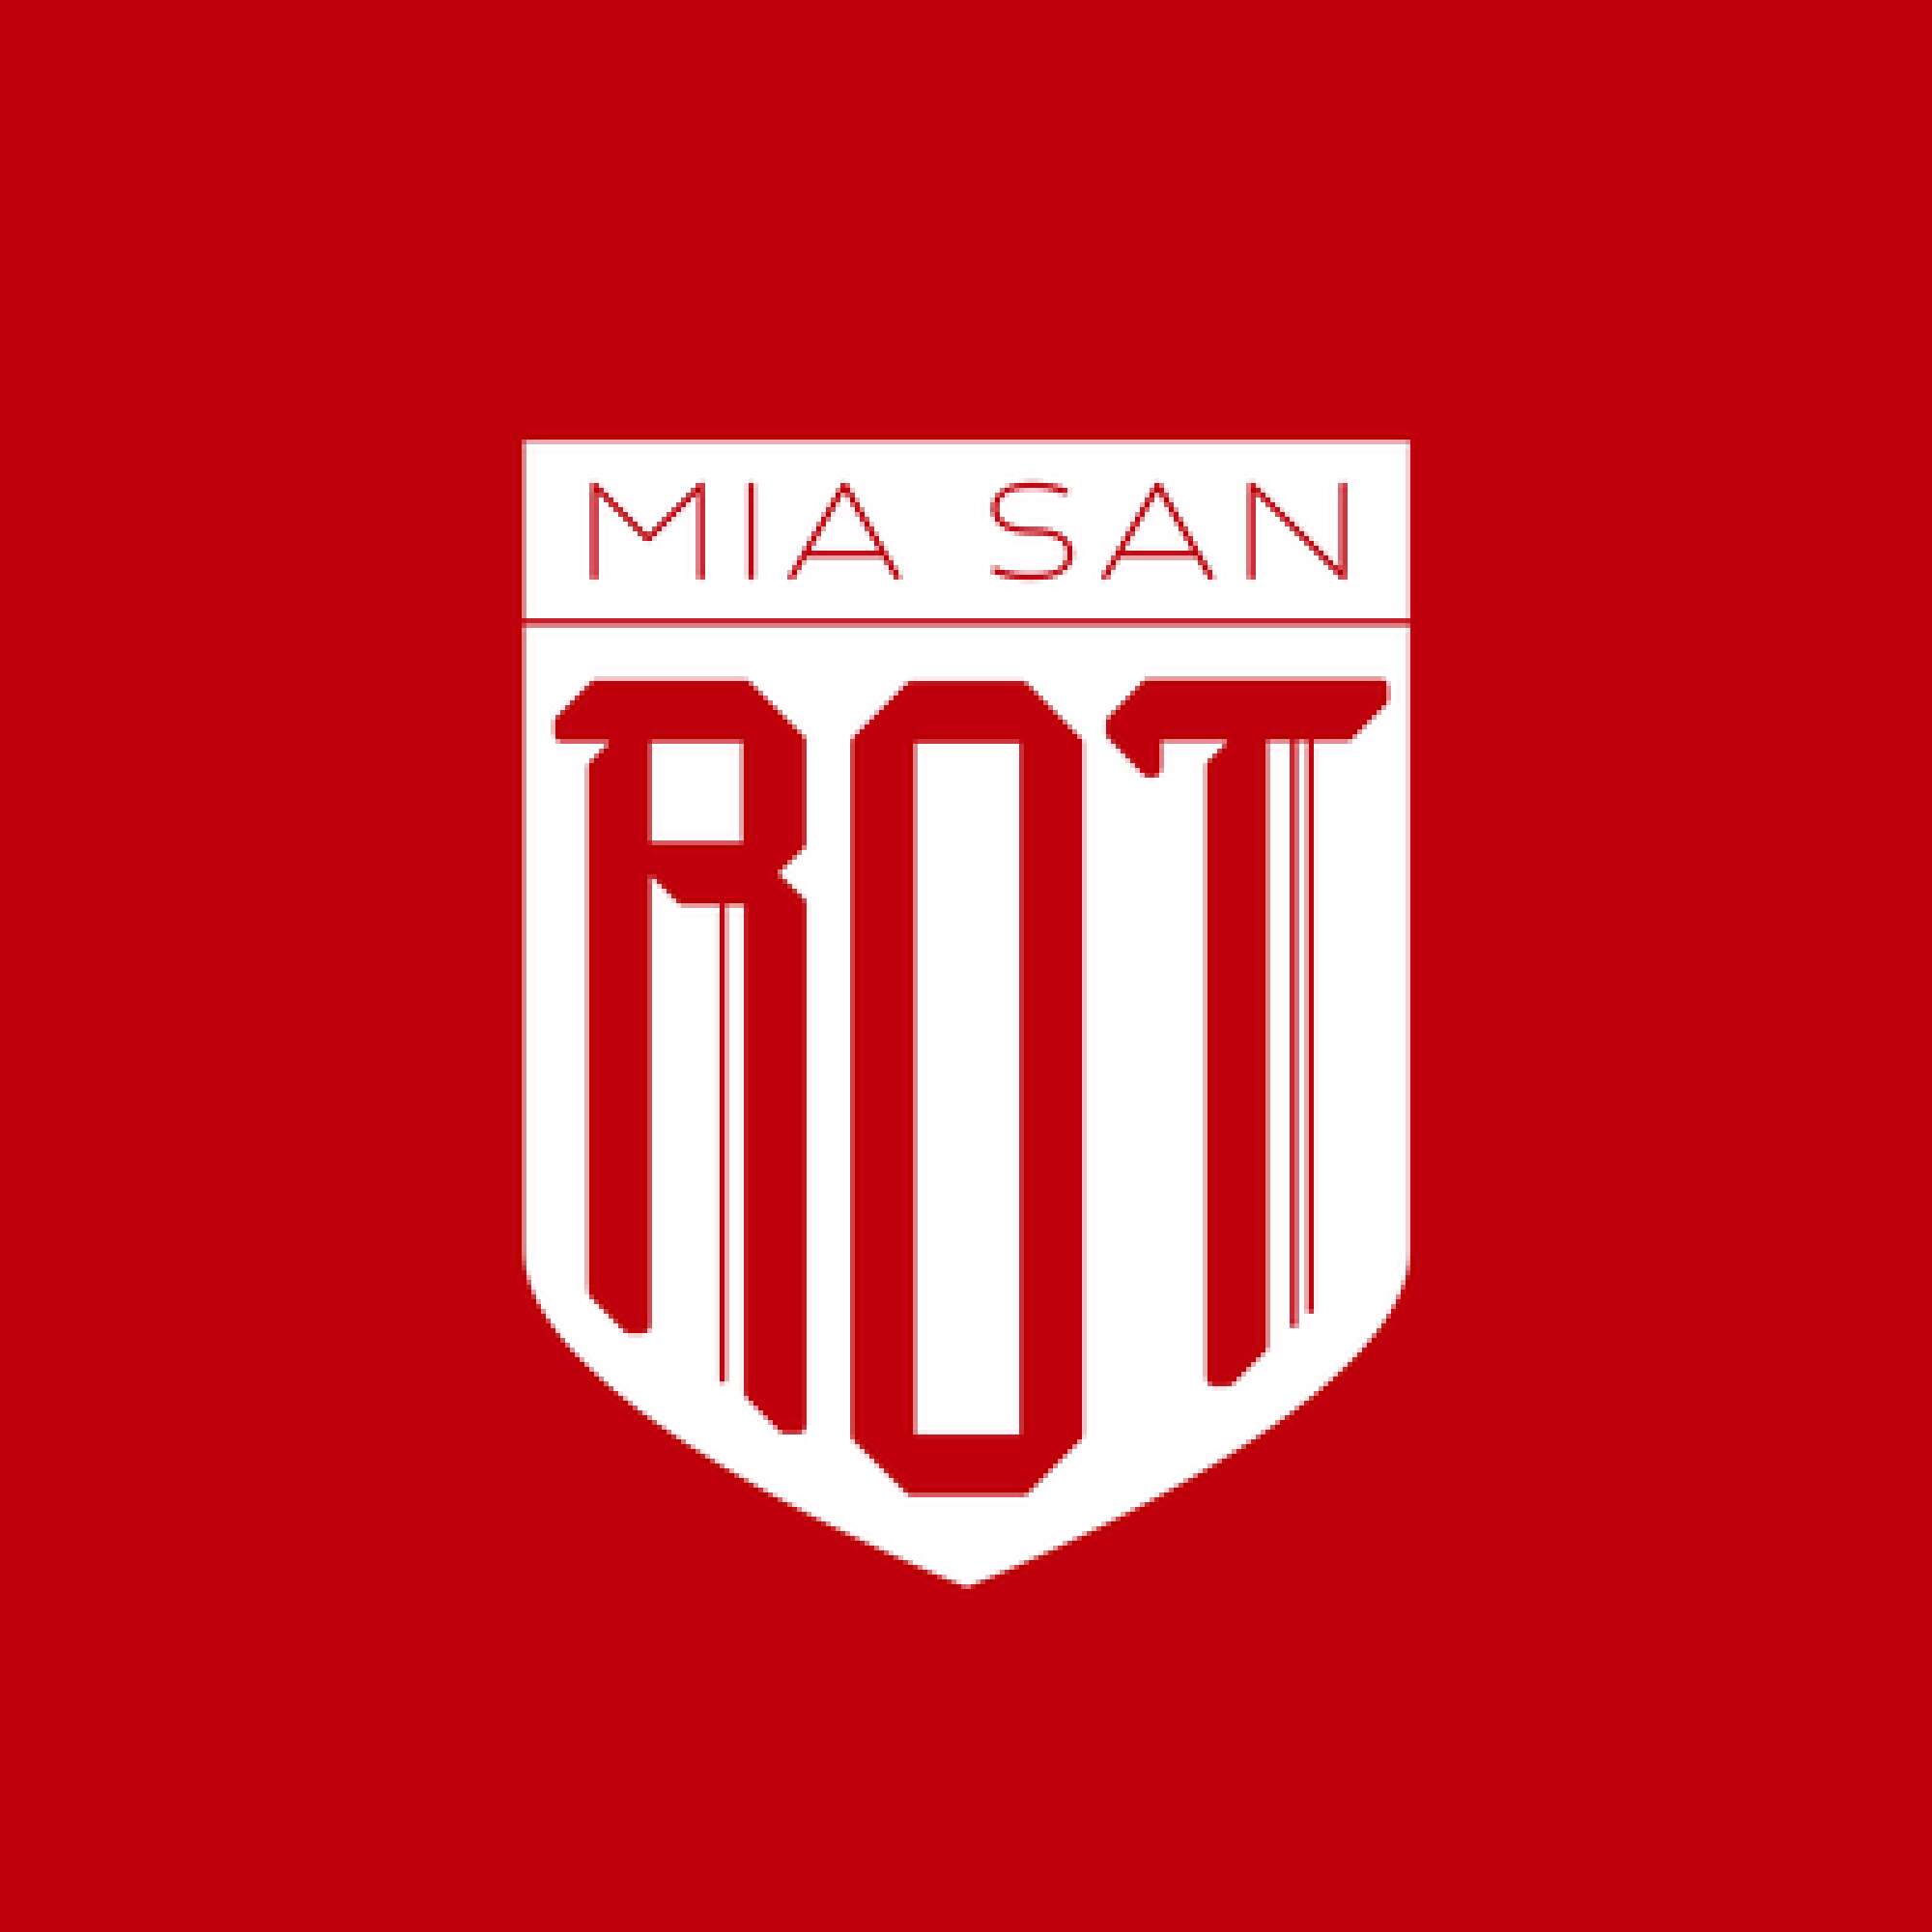 Podcast-Cover "Mia san rot"